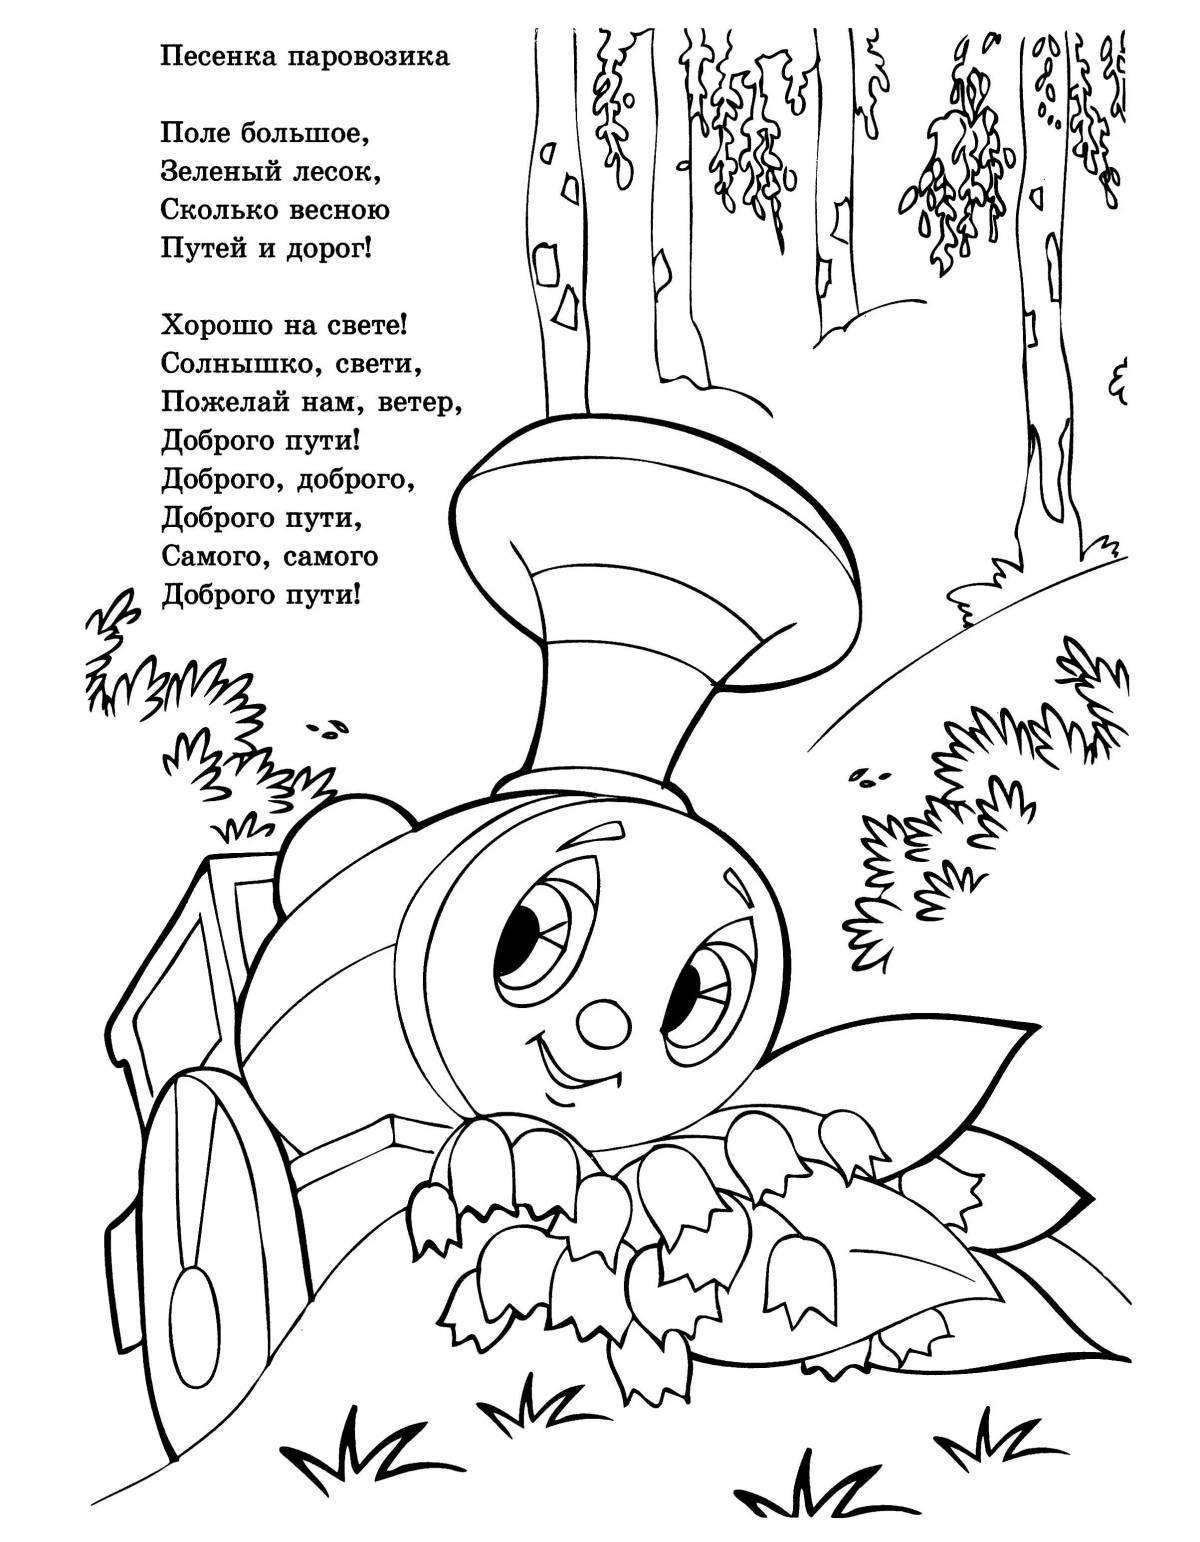 Great coloring book from Soviet cartoons